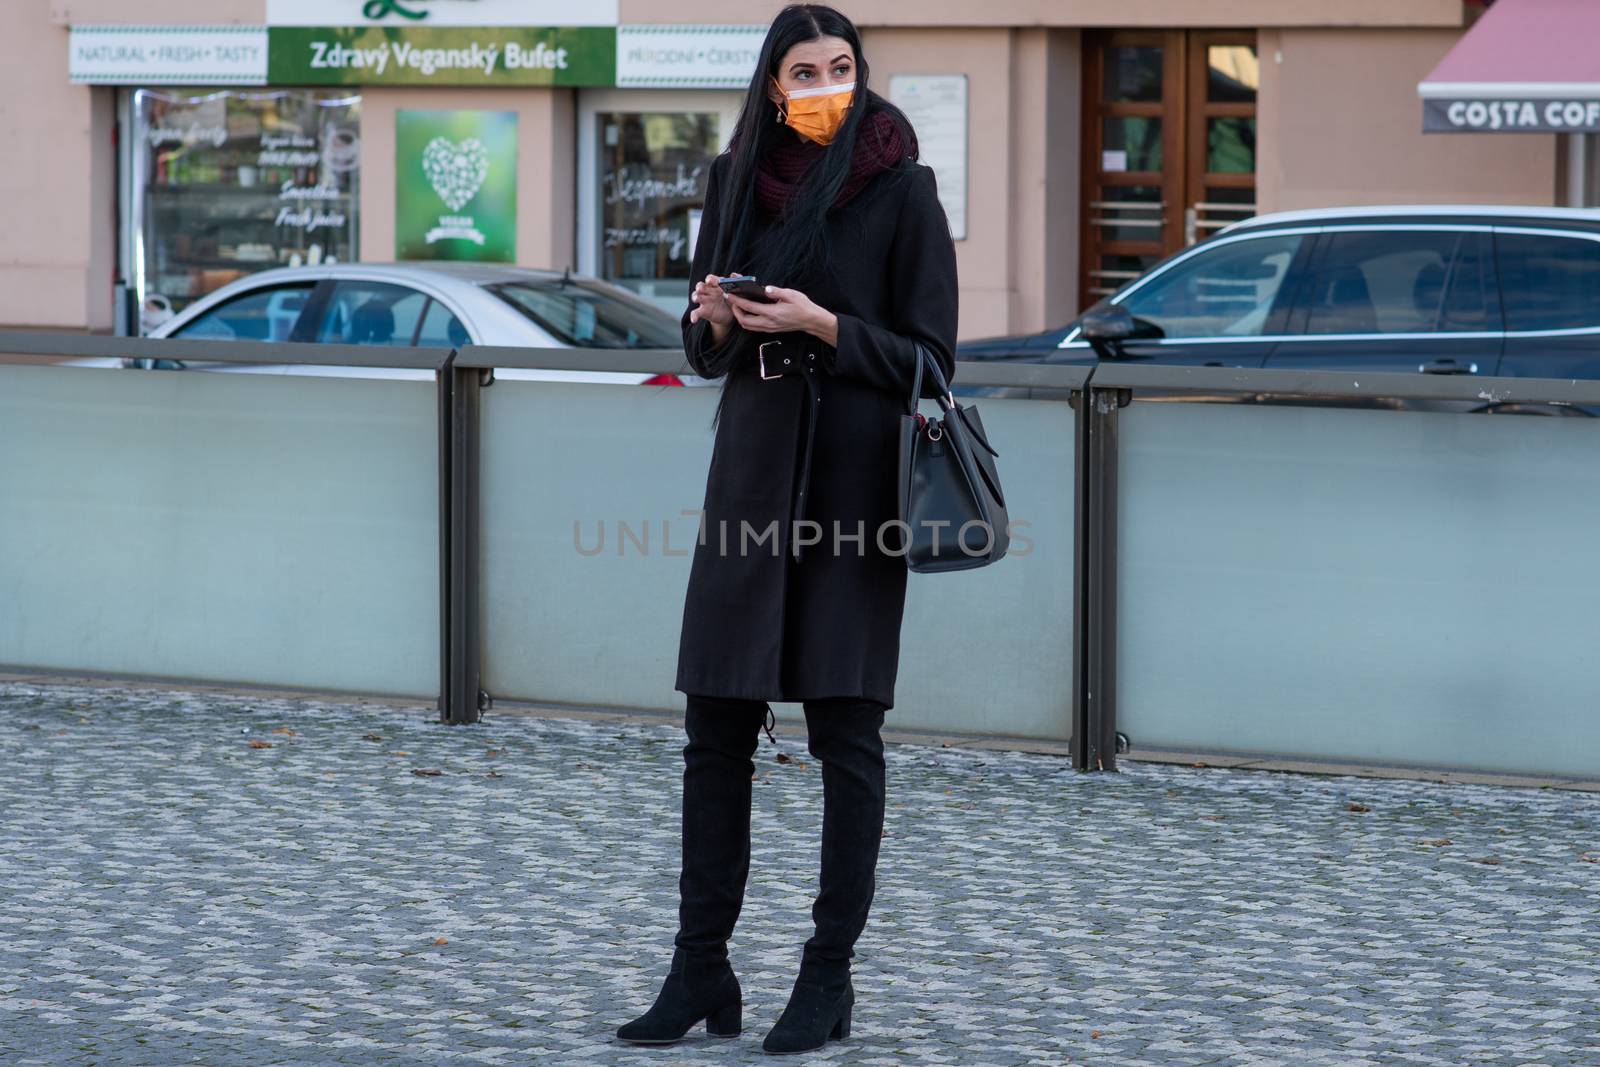 11/16/2020. Czech Republic. A woman wearing a mask is waiting for a tram at Hradcanska tram stop during quarantine. This is a lockdown period in the Czech Republic due to the increase of COVID-19 infectious in the country. Hradcanska tram stop it is in Prague 6